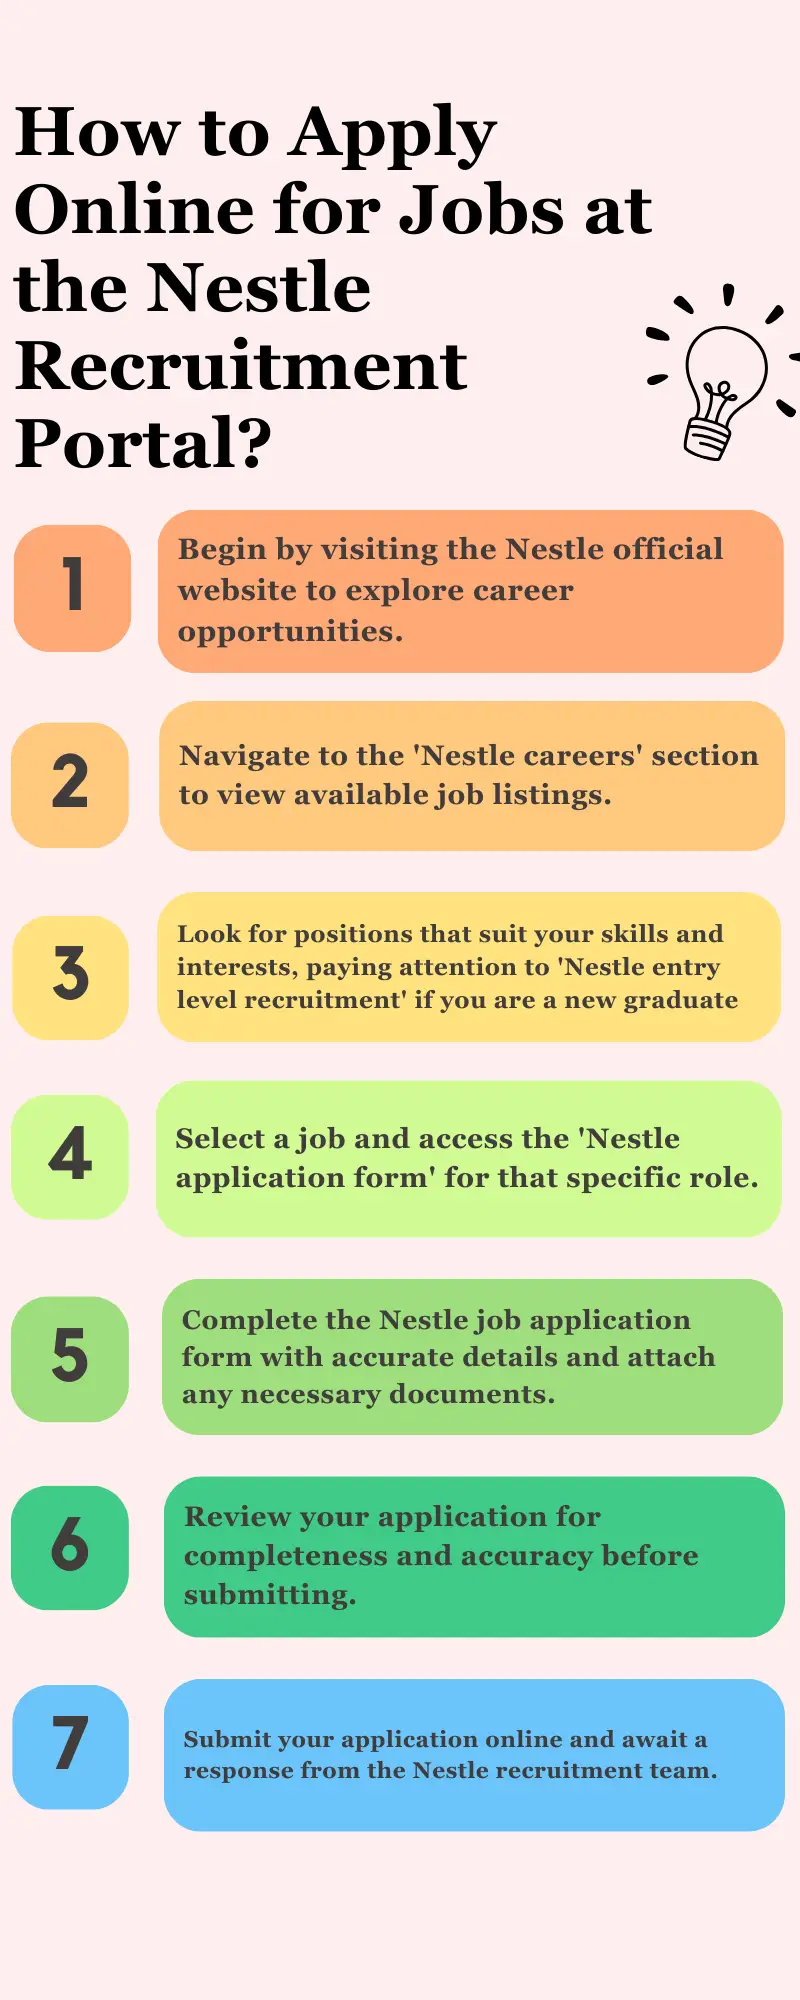 How to Apply Online for Jobs at the Nestle Recruitment Portal?